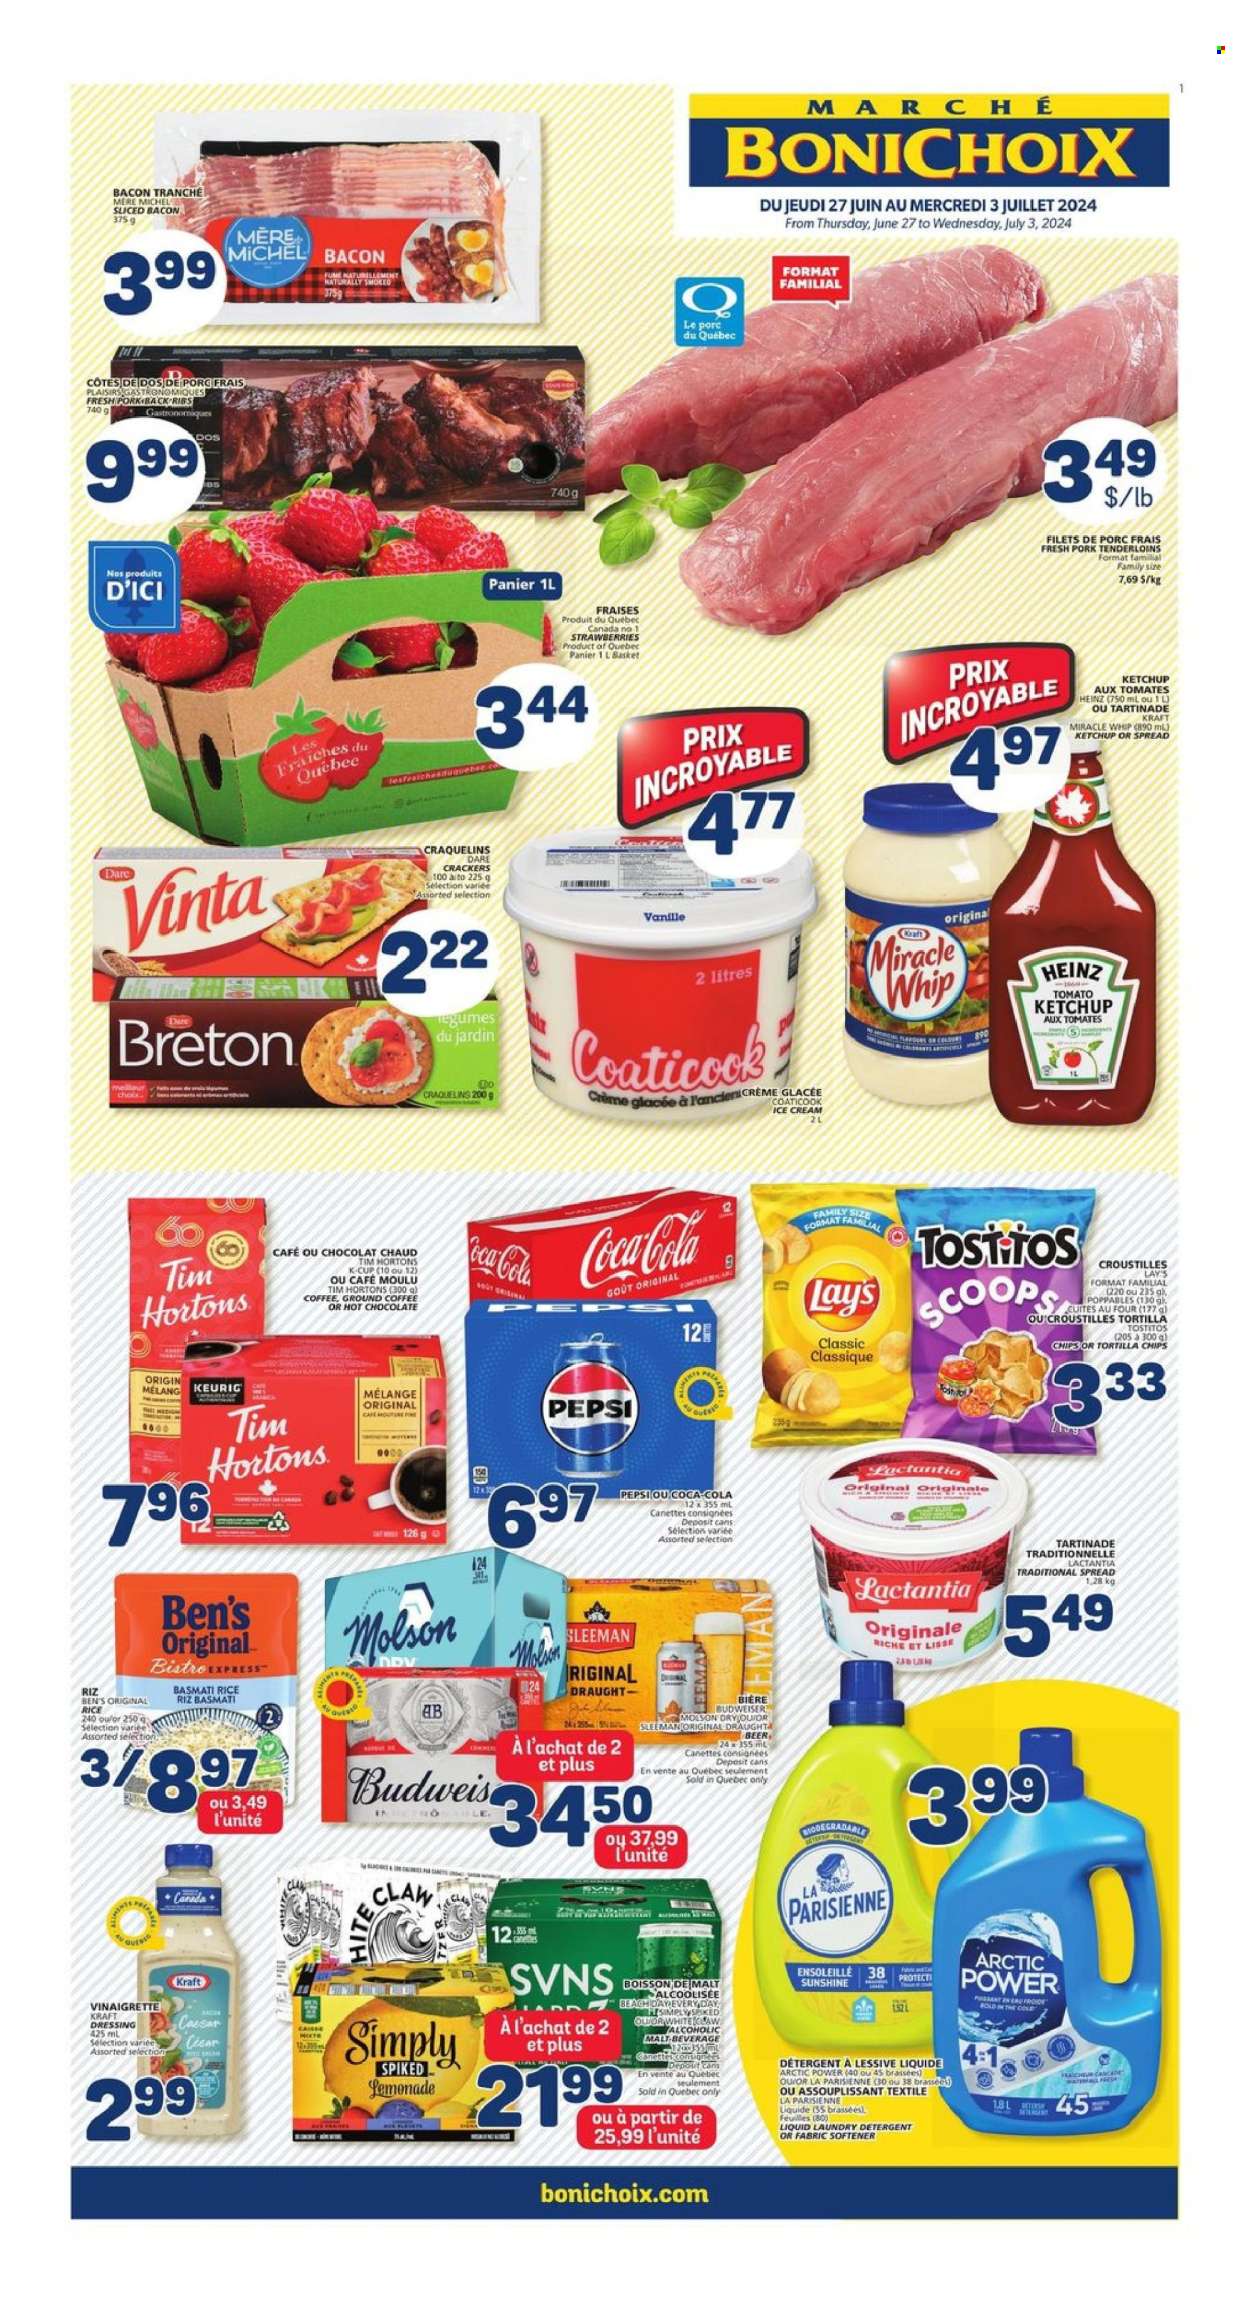 thumbnail - Marché Bonichoix Flyer - June 27, 2024 - July 03, 2024 - Sales products - strawberries, Kraft®, ready meal, bacon, Sunshine, mayonnaise, Miracle Whip, crackers, tortilla chips, Lay’s, Tostitos, salty snack, Uncle Ben's, basmati rice, rice, ketchup, dressing, Coca-Cola, lemonade, Pepsi, soft drink, malt beverage, carbonated soft drink, hot chocolate, ground coffee, coffee capsules, K-Cups, Keurig, alcohol, Budweiser, ribs, pork meat, pork ribs, pork tenderloin, pork back ribs, detergent, fabric softener, laundry detergent, Cascade, Heinz. Page 1.